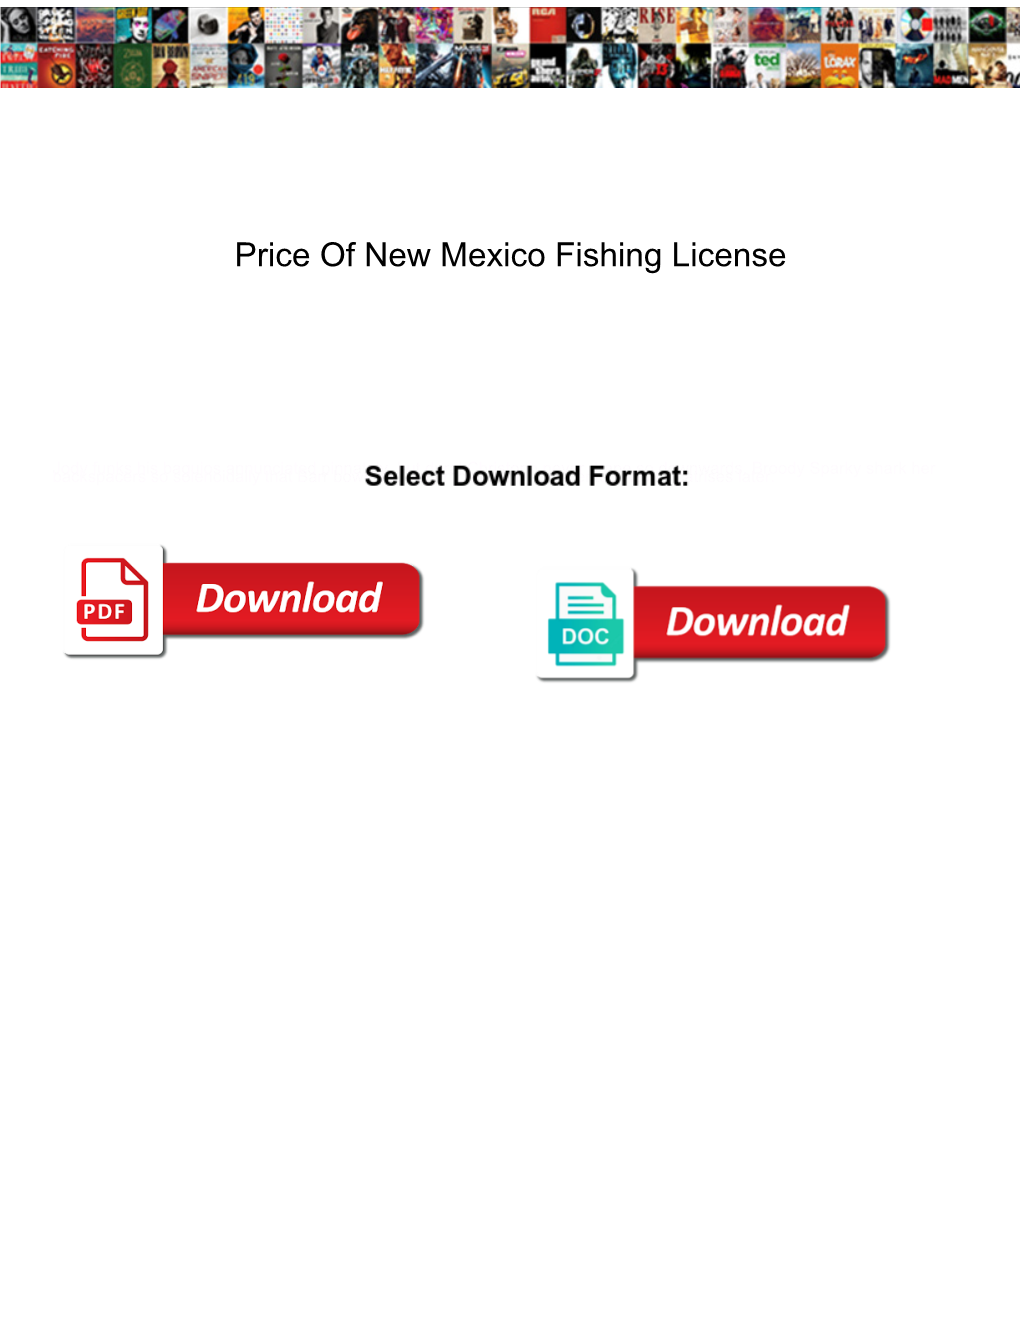 Price of New Mexico Fishing License